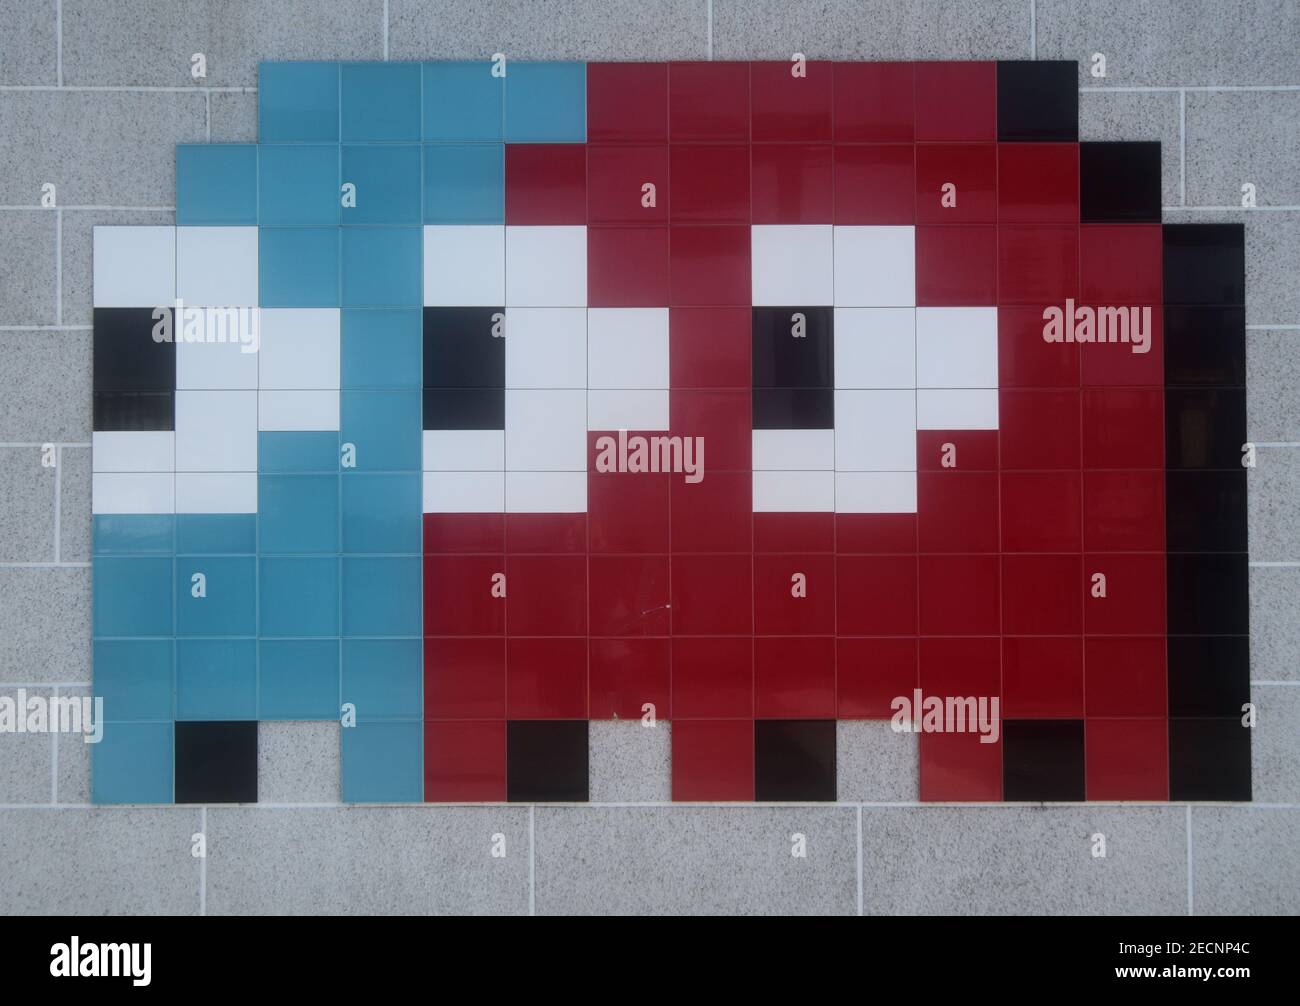 Pixelated image of Pac Man game character Inky and Blinky, formed  by  tiles and mounted on wall Stock Photo